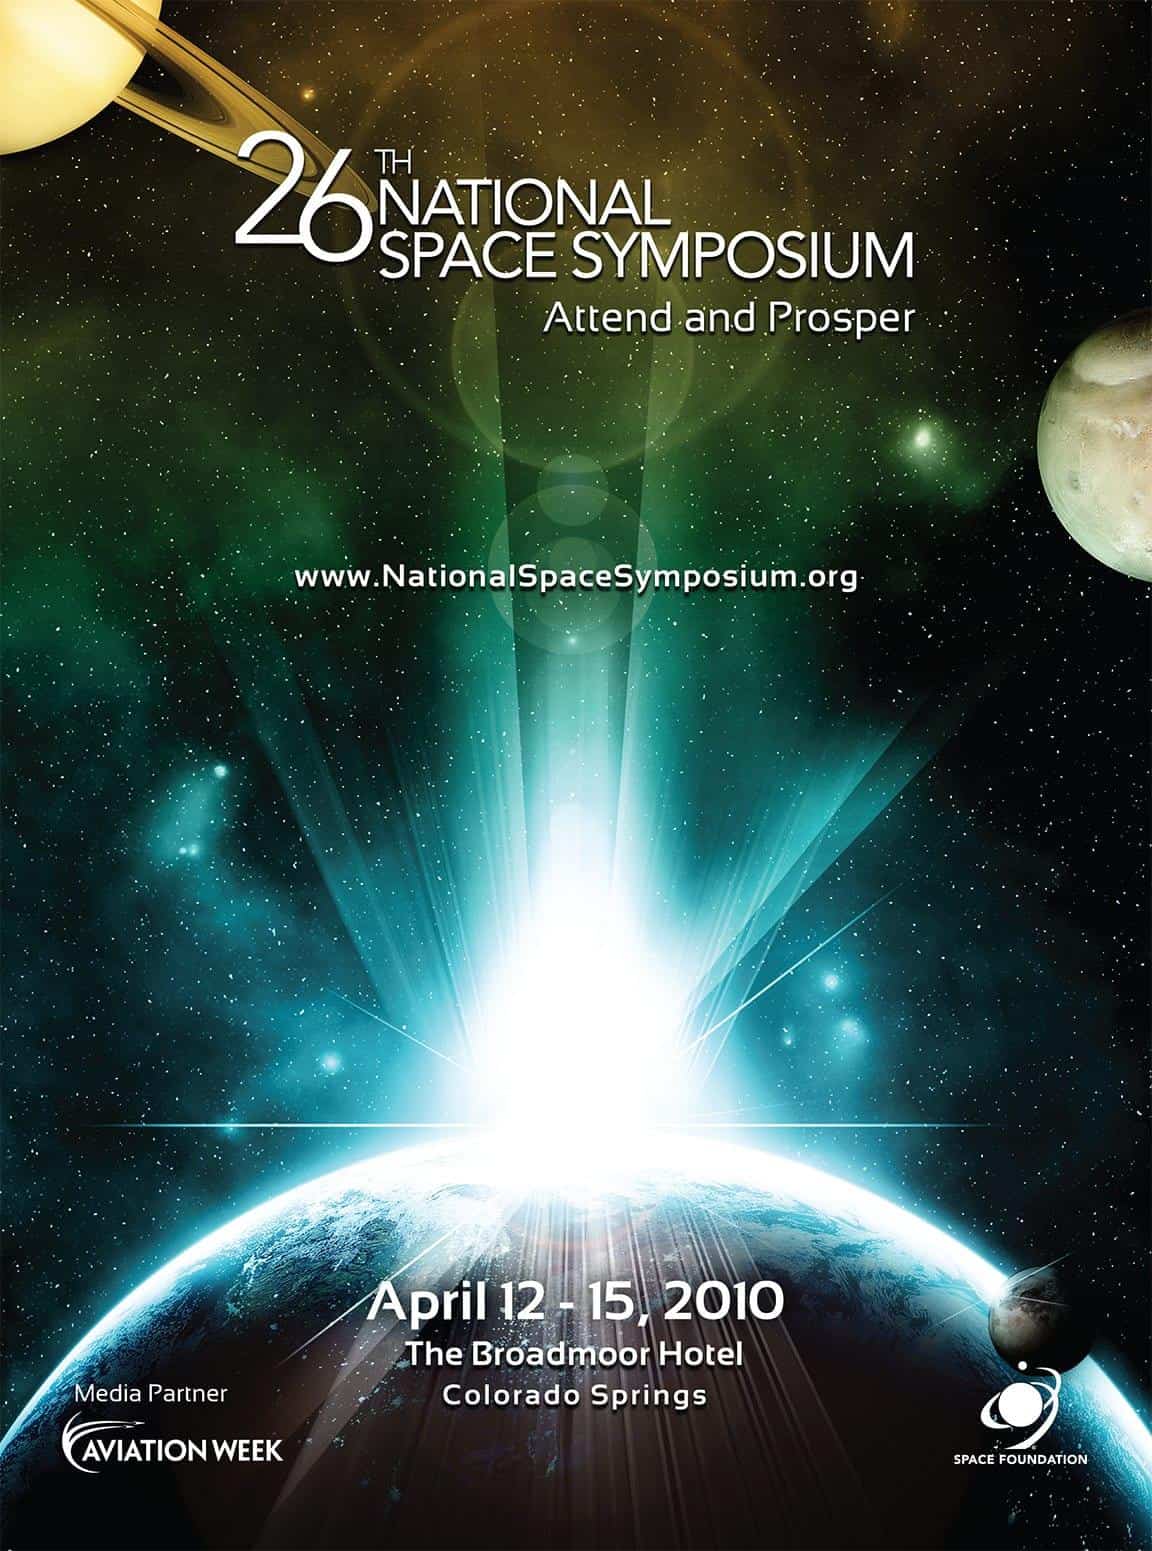 WOW Factor Digital Marketing Agency - 26th National Space Symposium